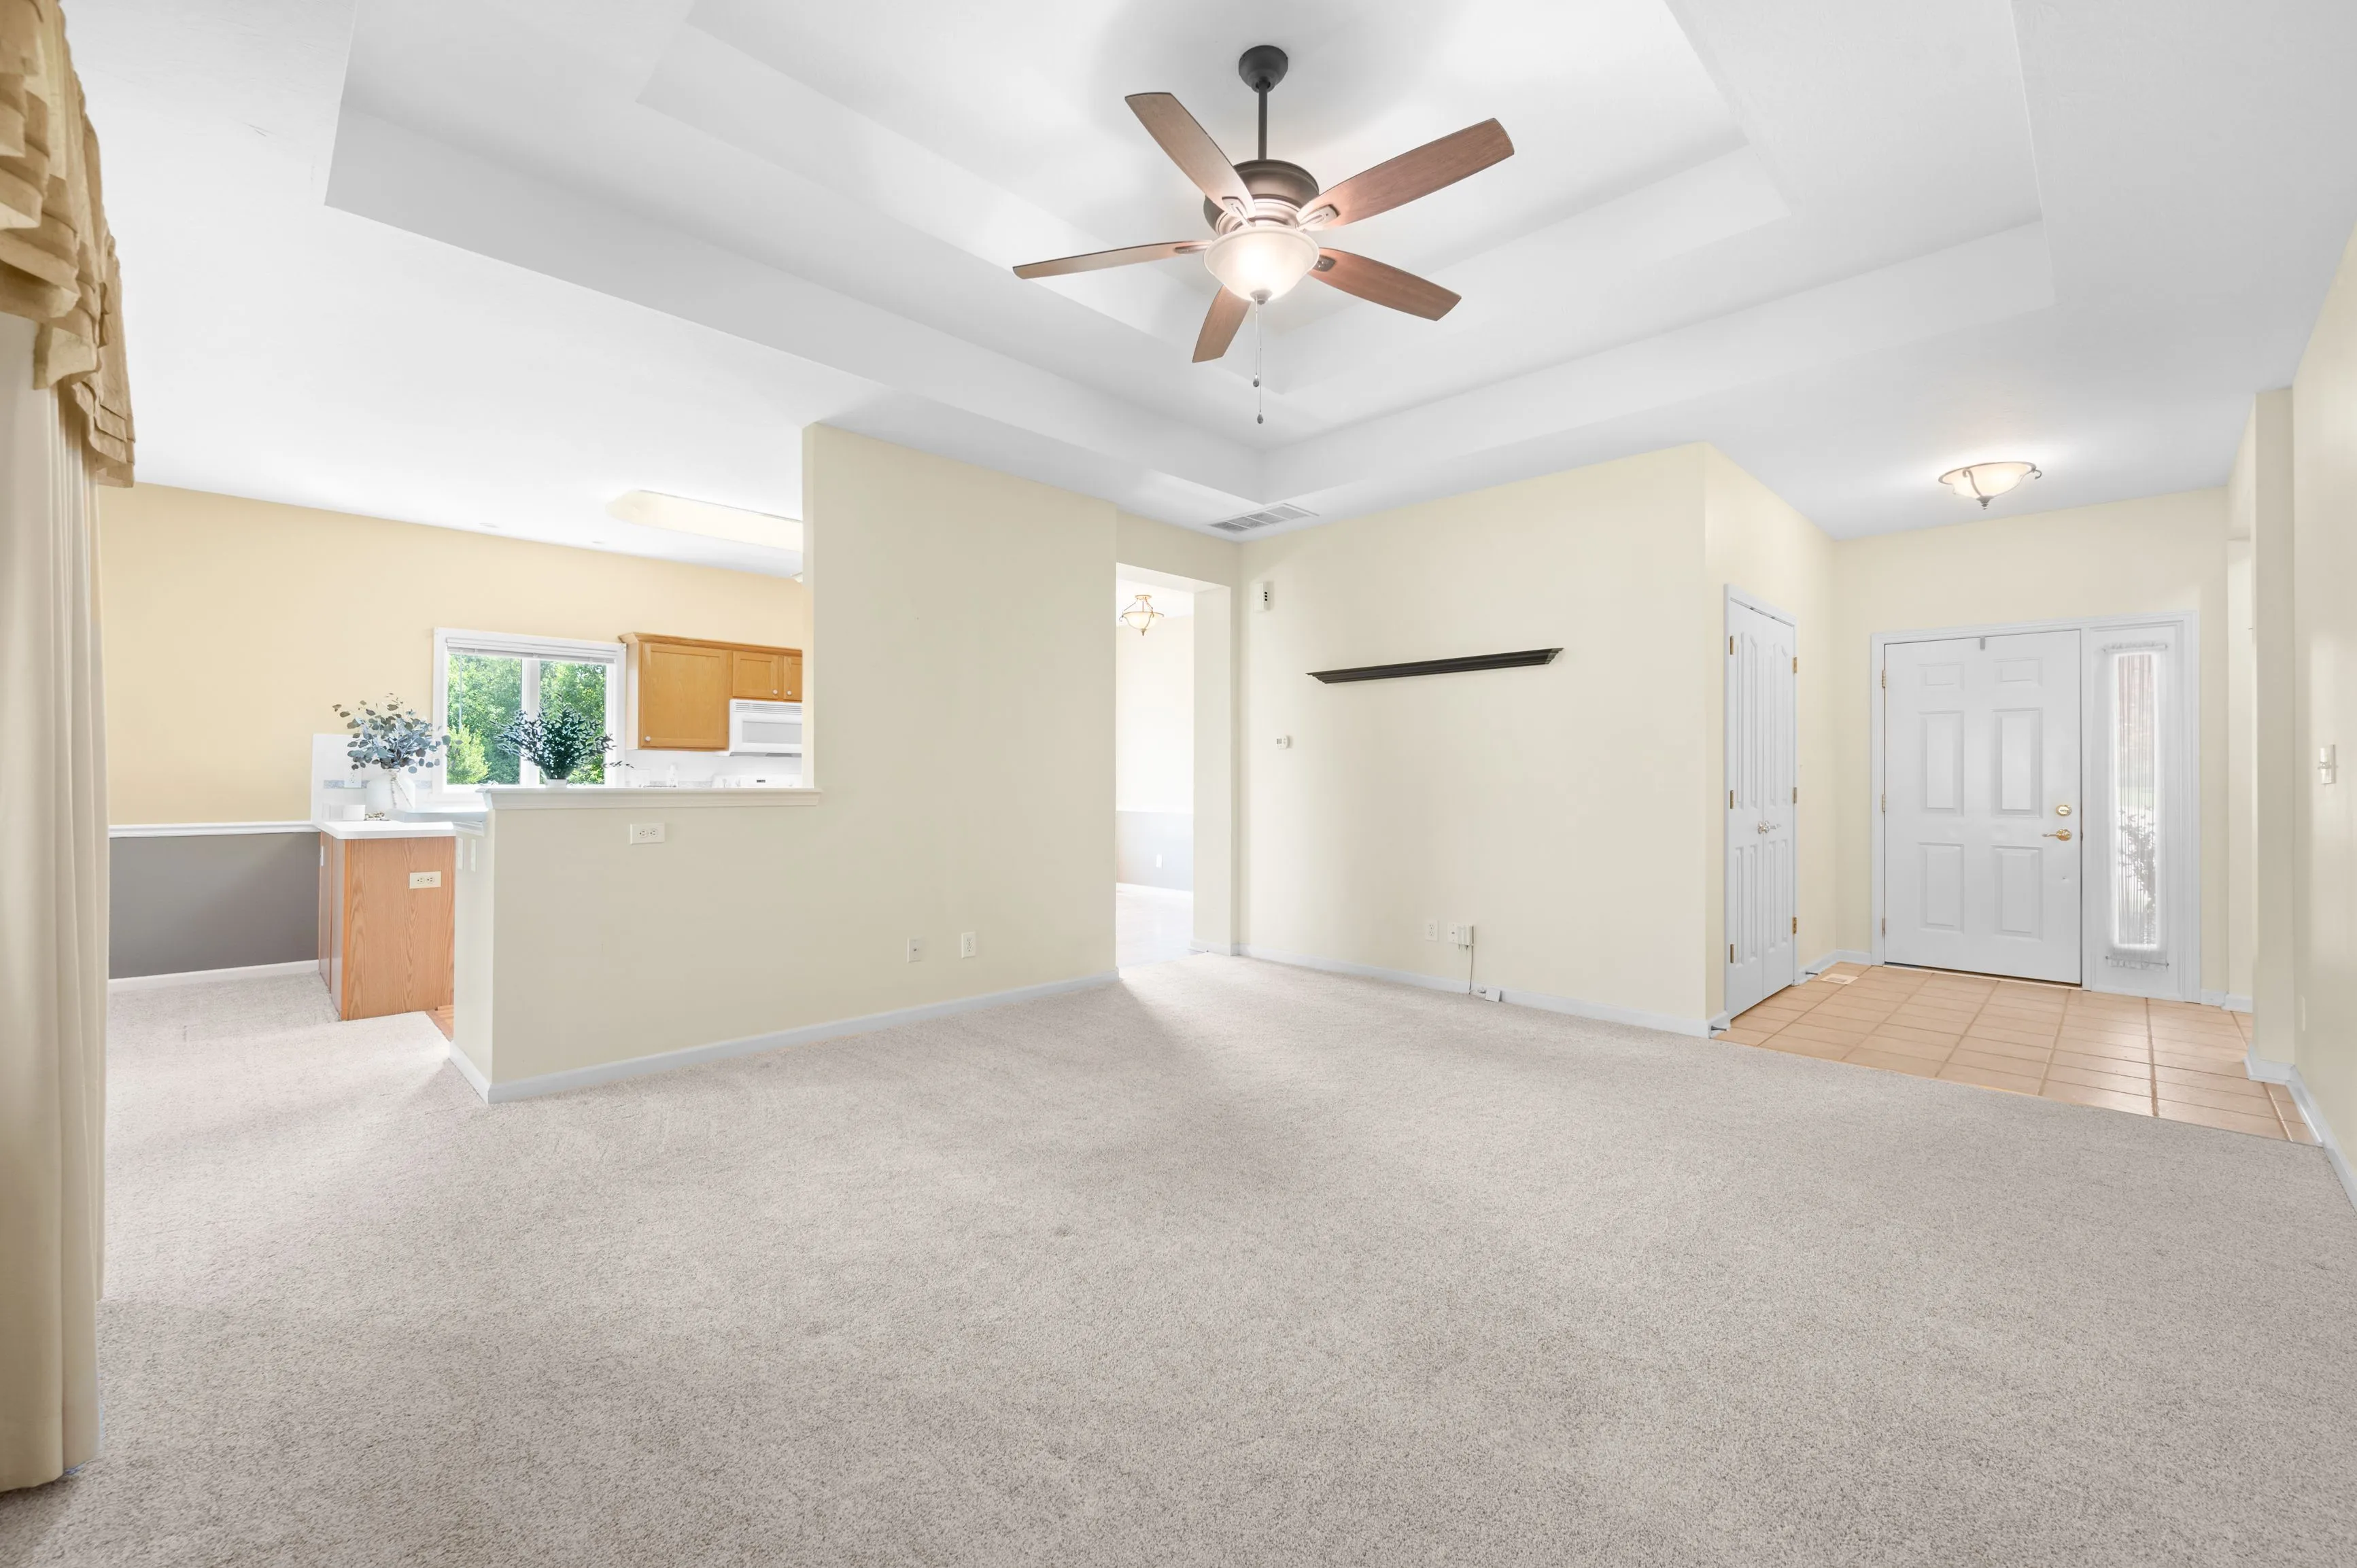 Spacious empty living room with beige walls, carpet flooring, ceiling fan, and a view into the kitchen and entryway.